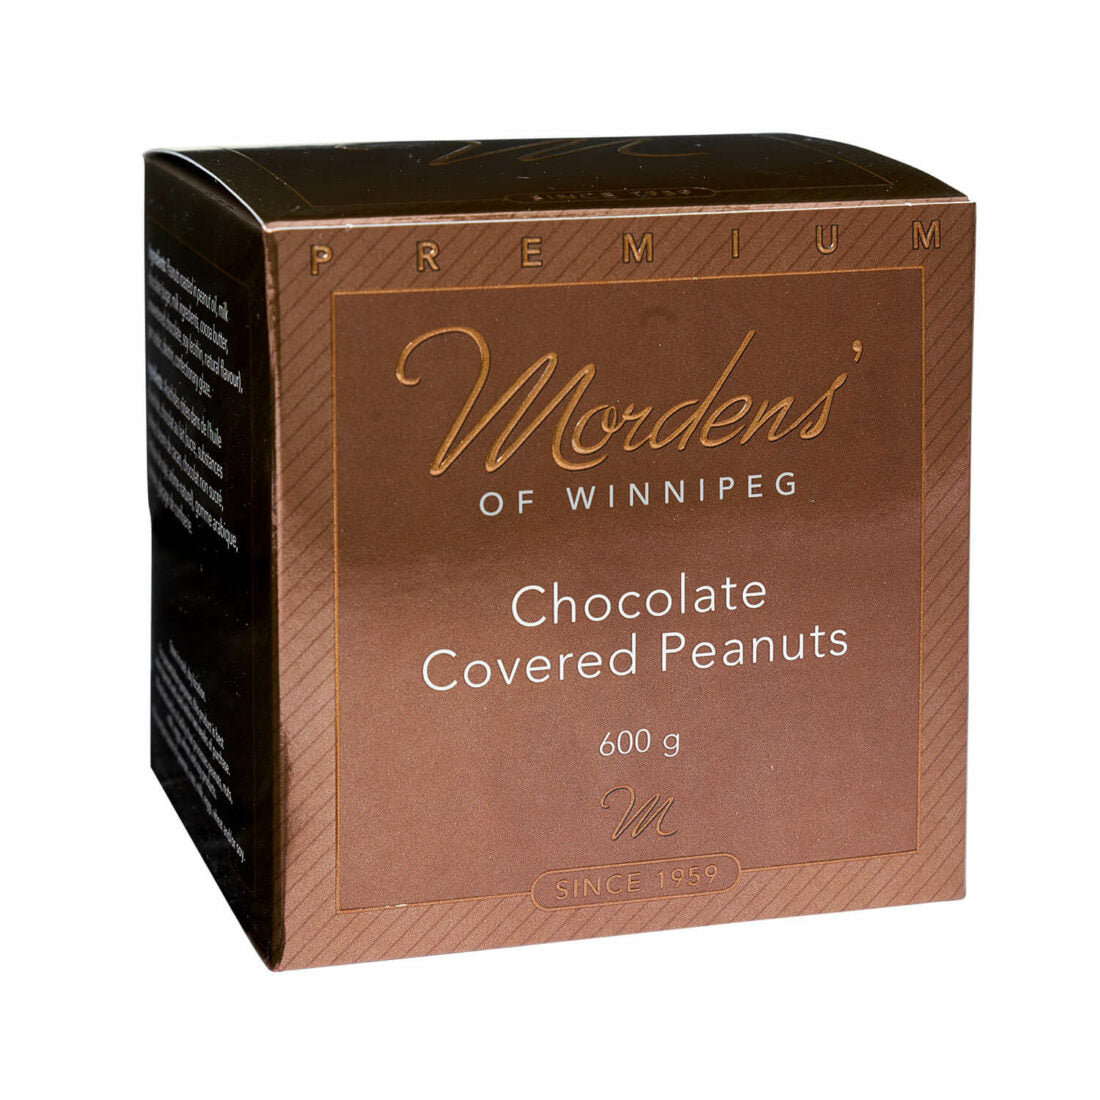 Morden's Chocolate Covered Peanuts